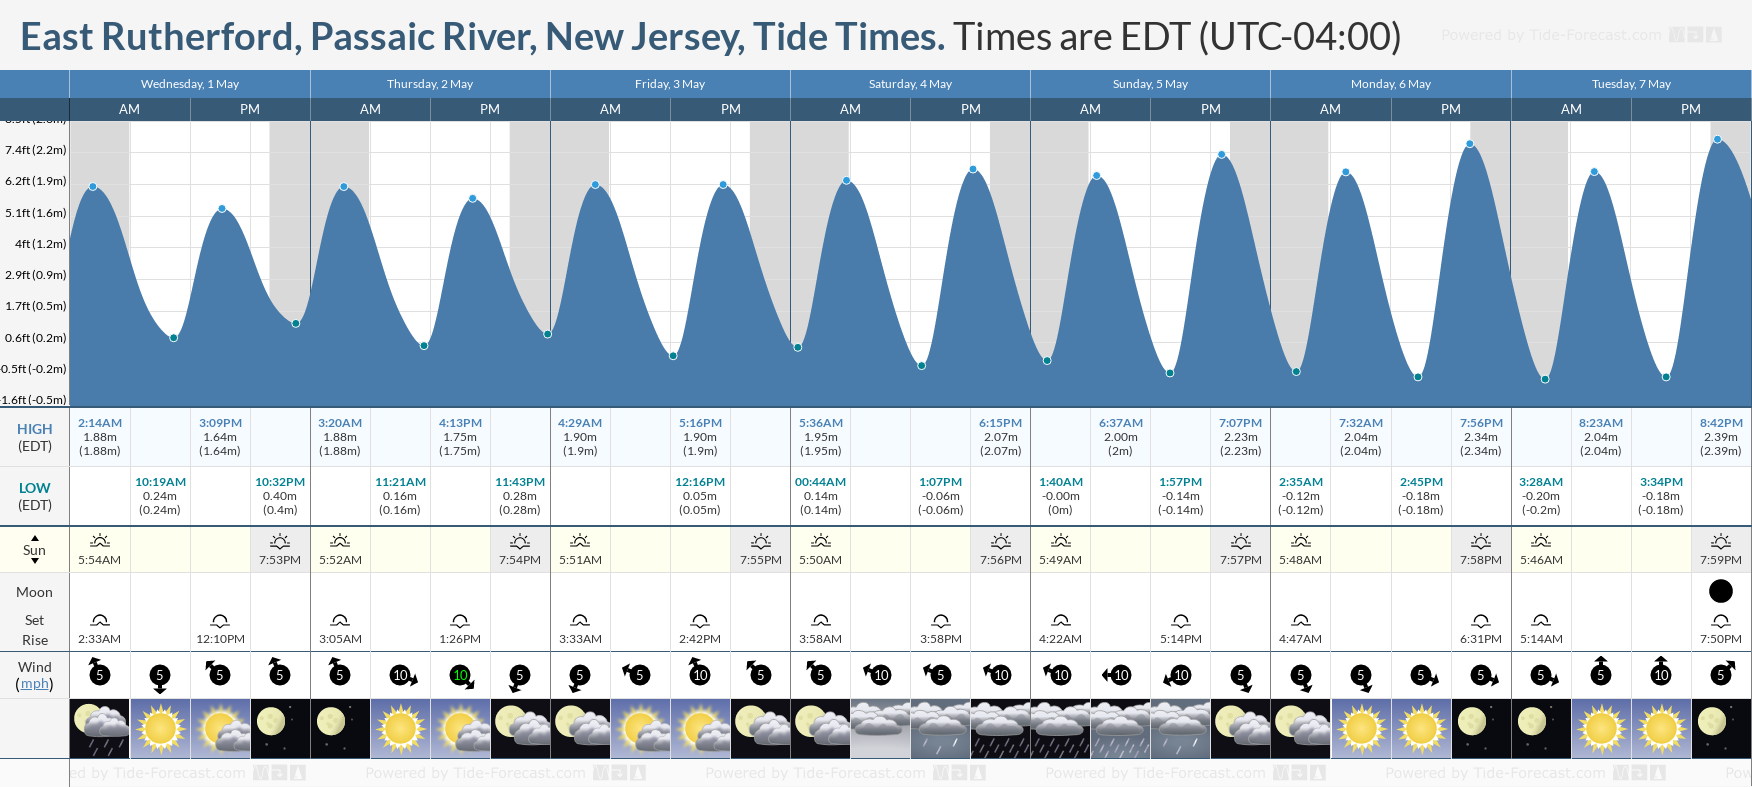 East Rutherford, Passaic River, New Jersey Tide Chart including high and low tide tide times for the next 7 days